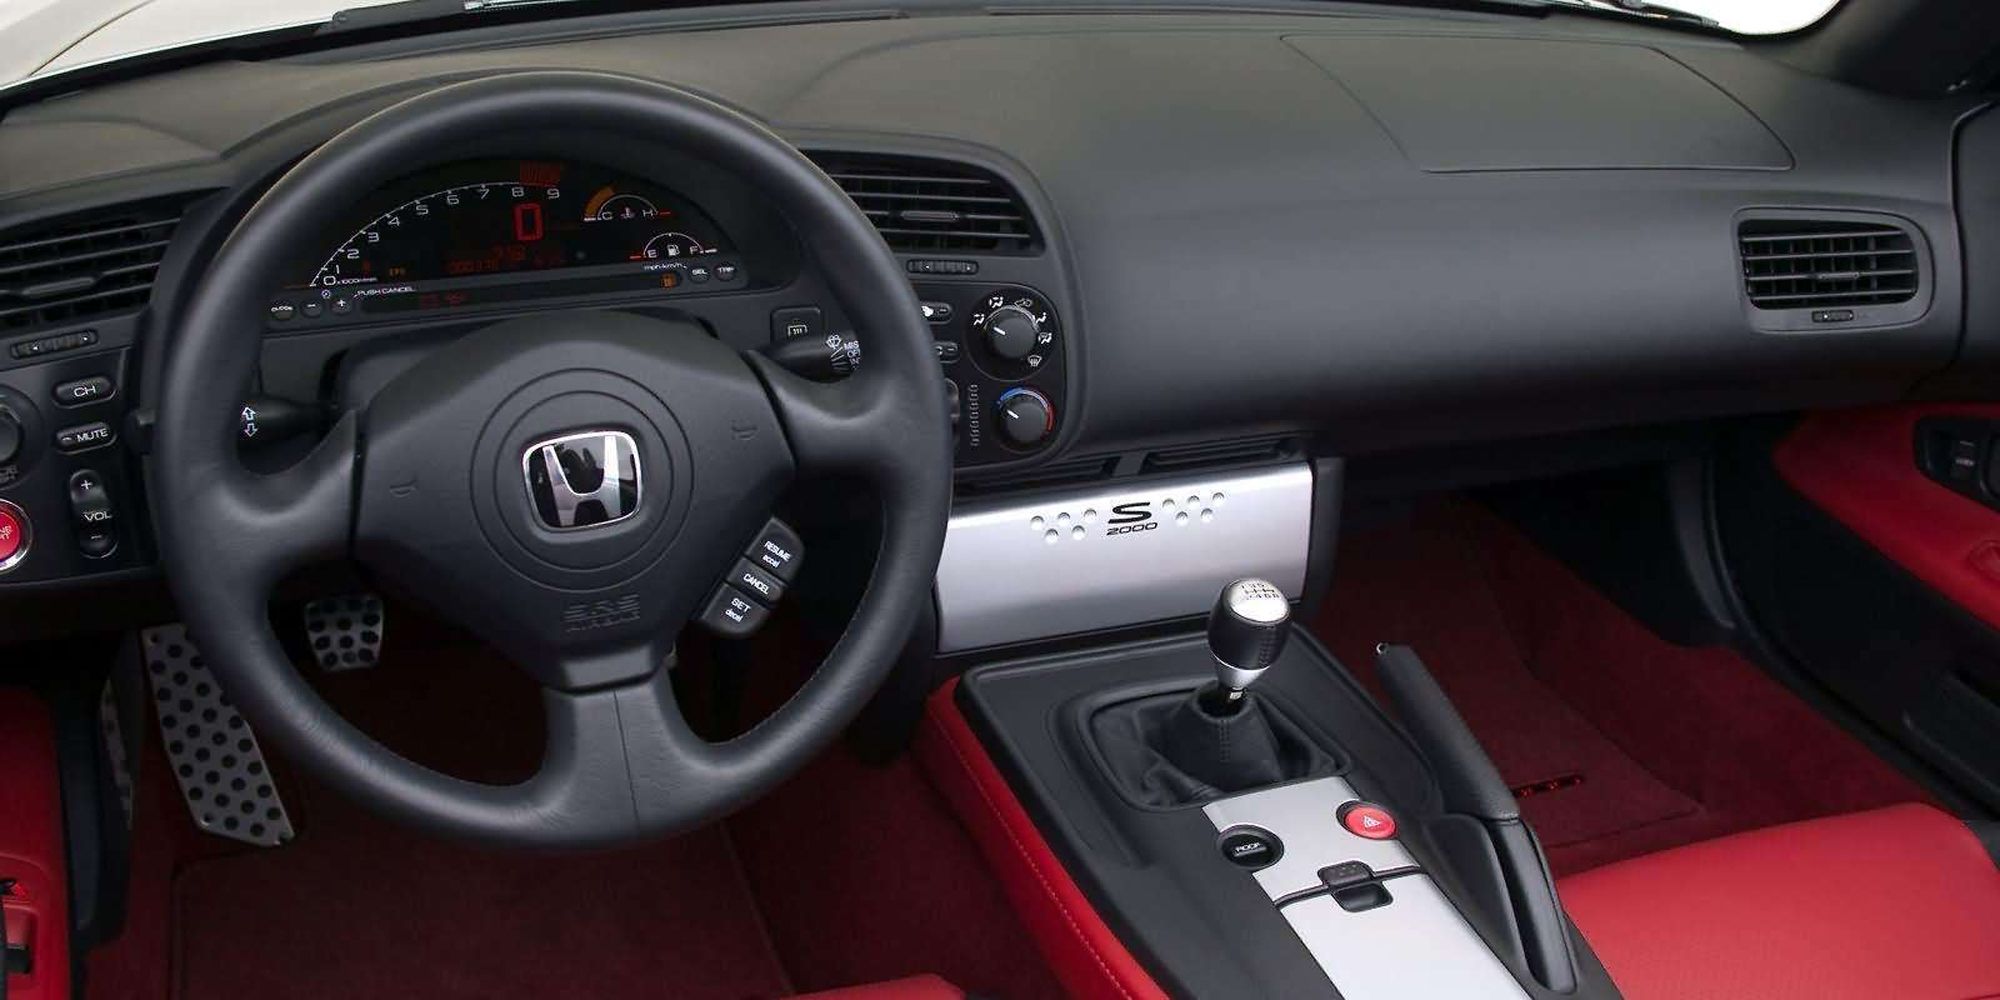 The interior of the AP2 S2000